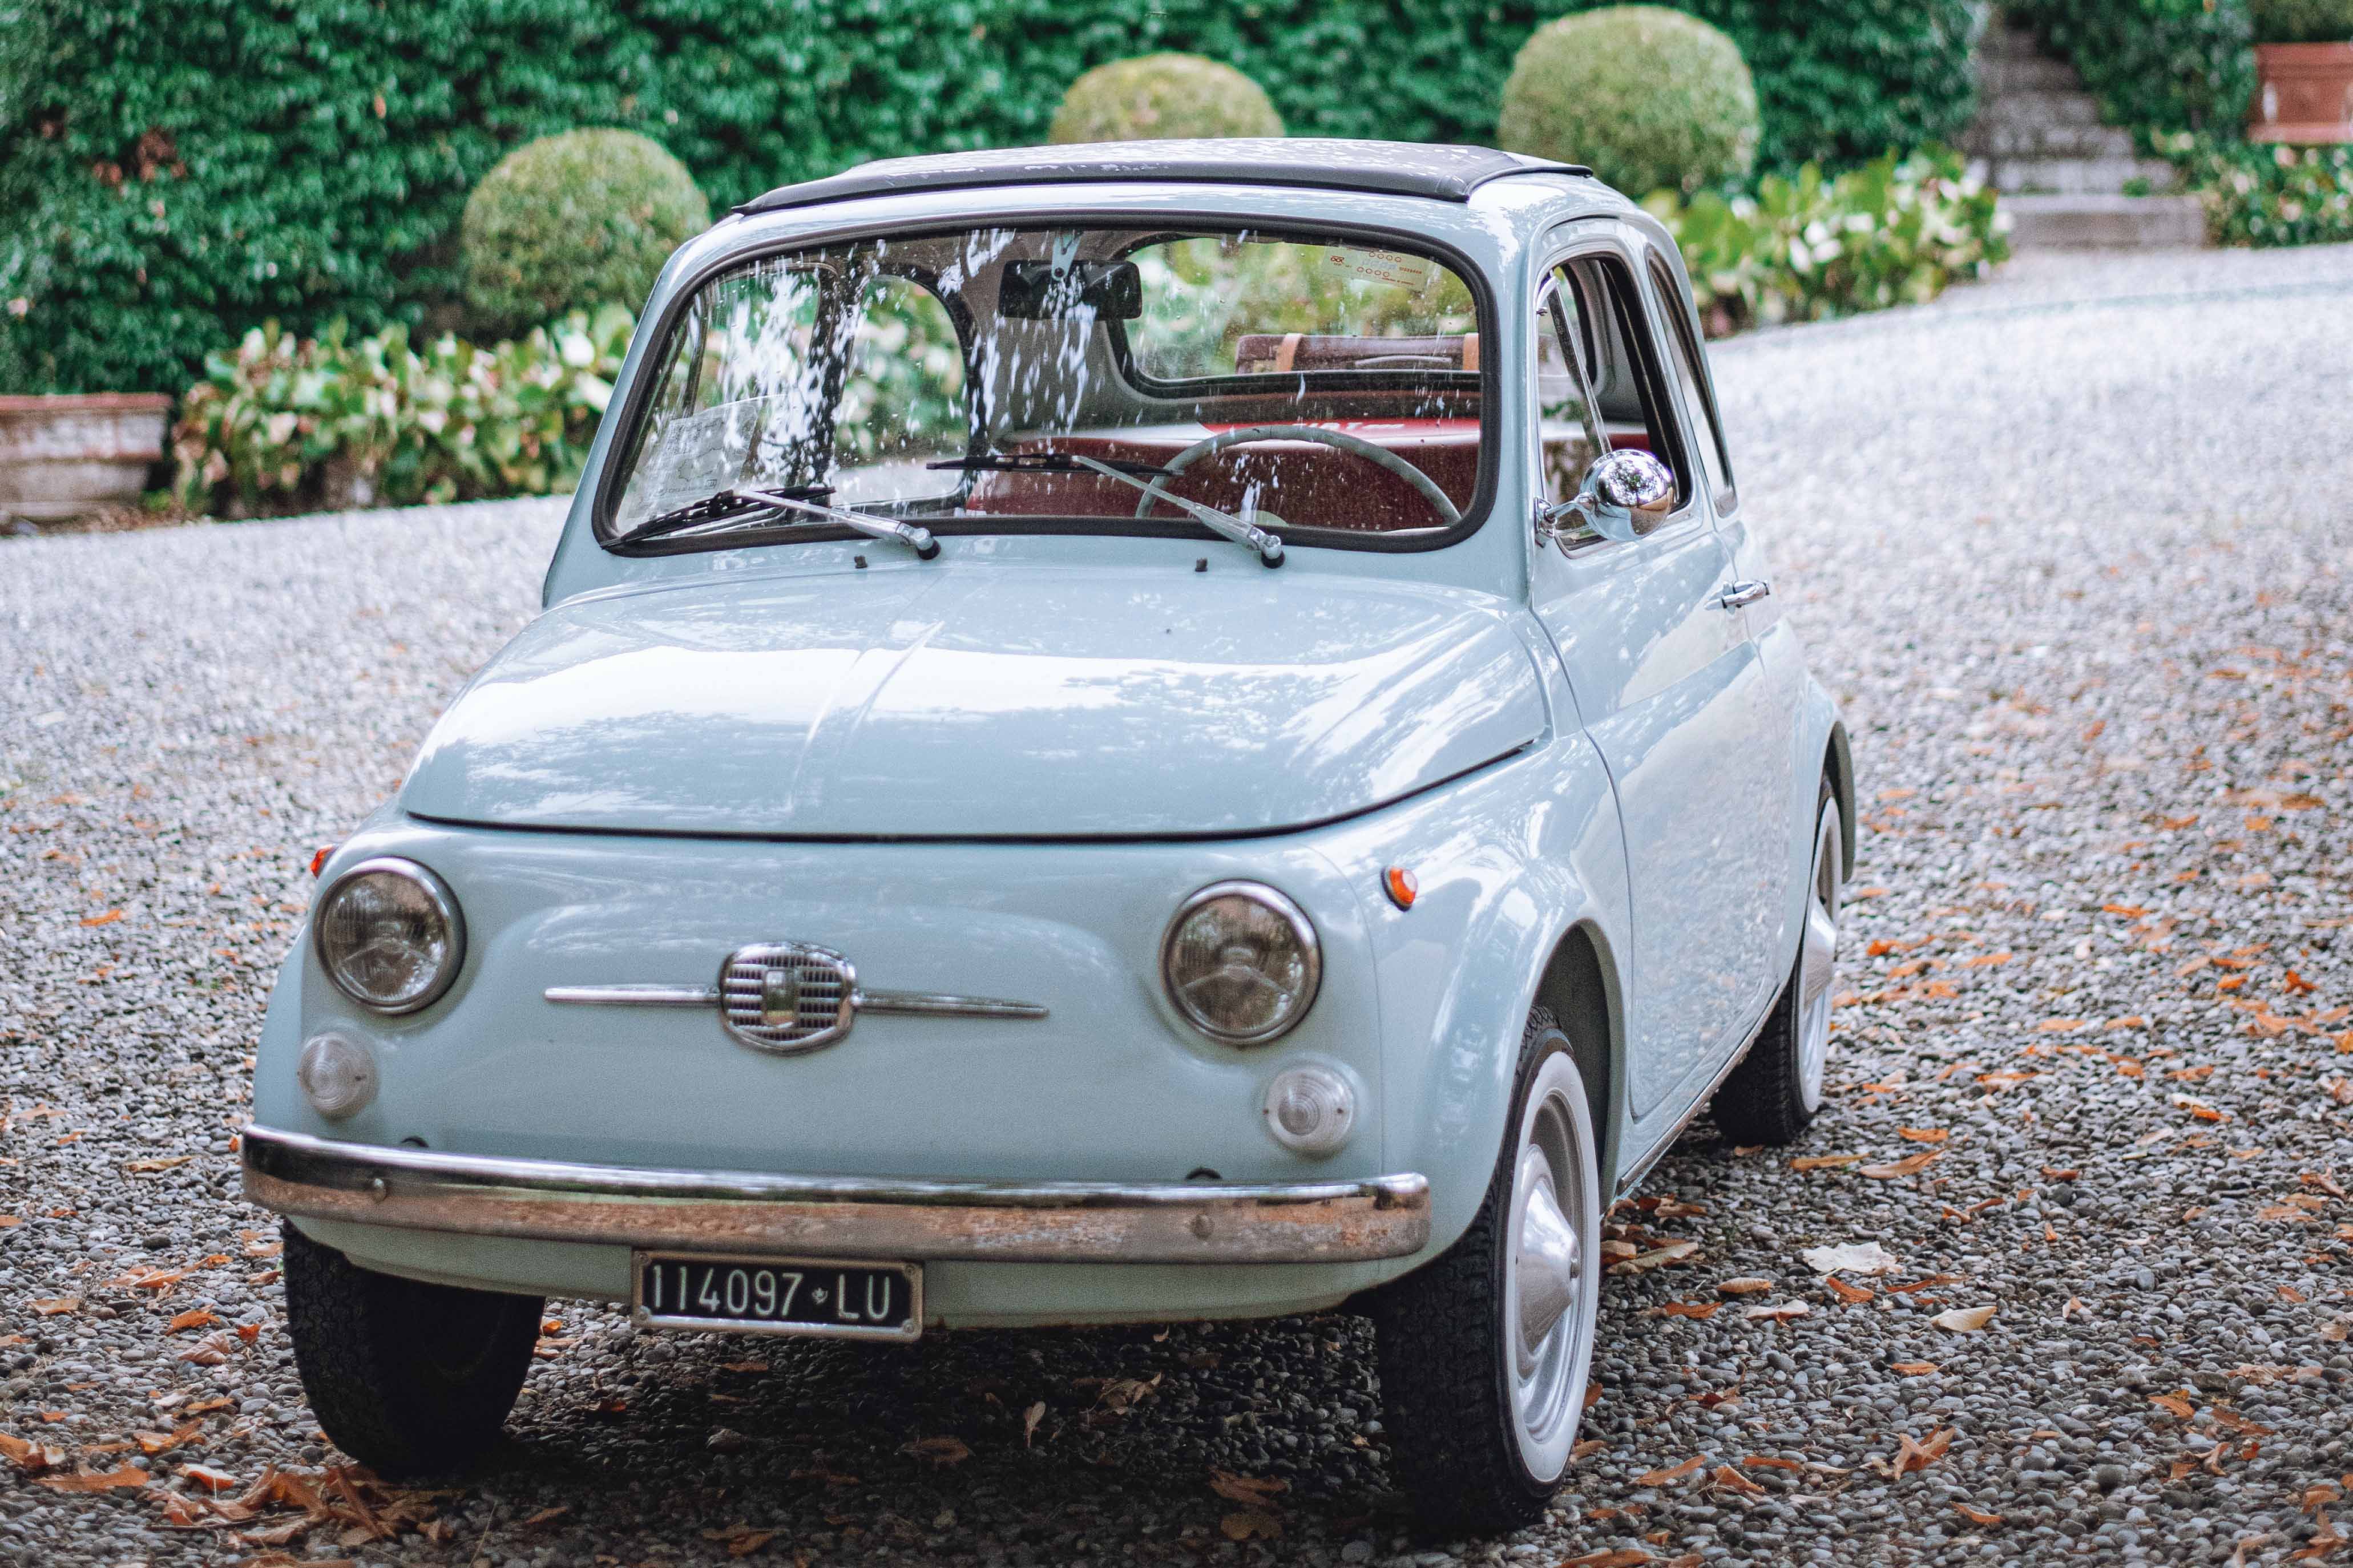 1968 FIAT 500F for sale by auction in Lucca, Tuscany, Italy